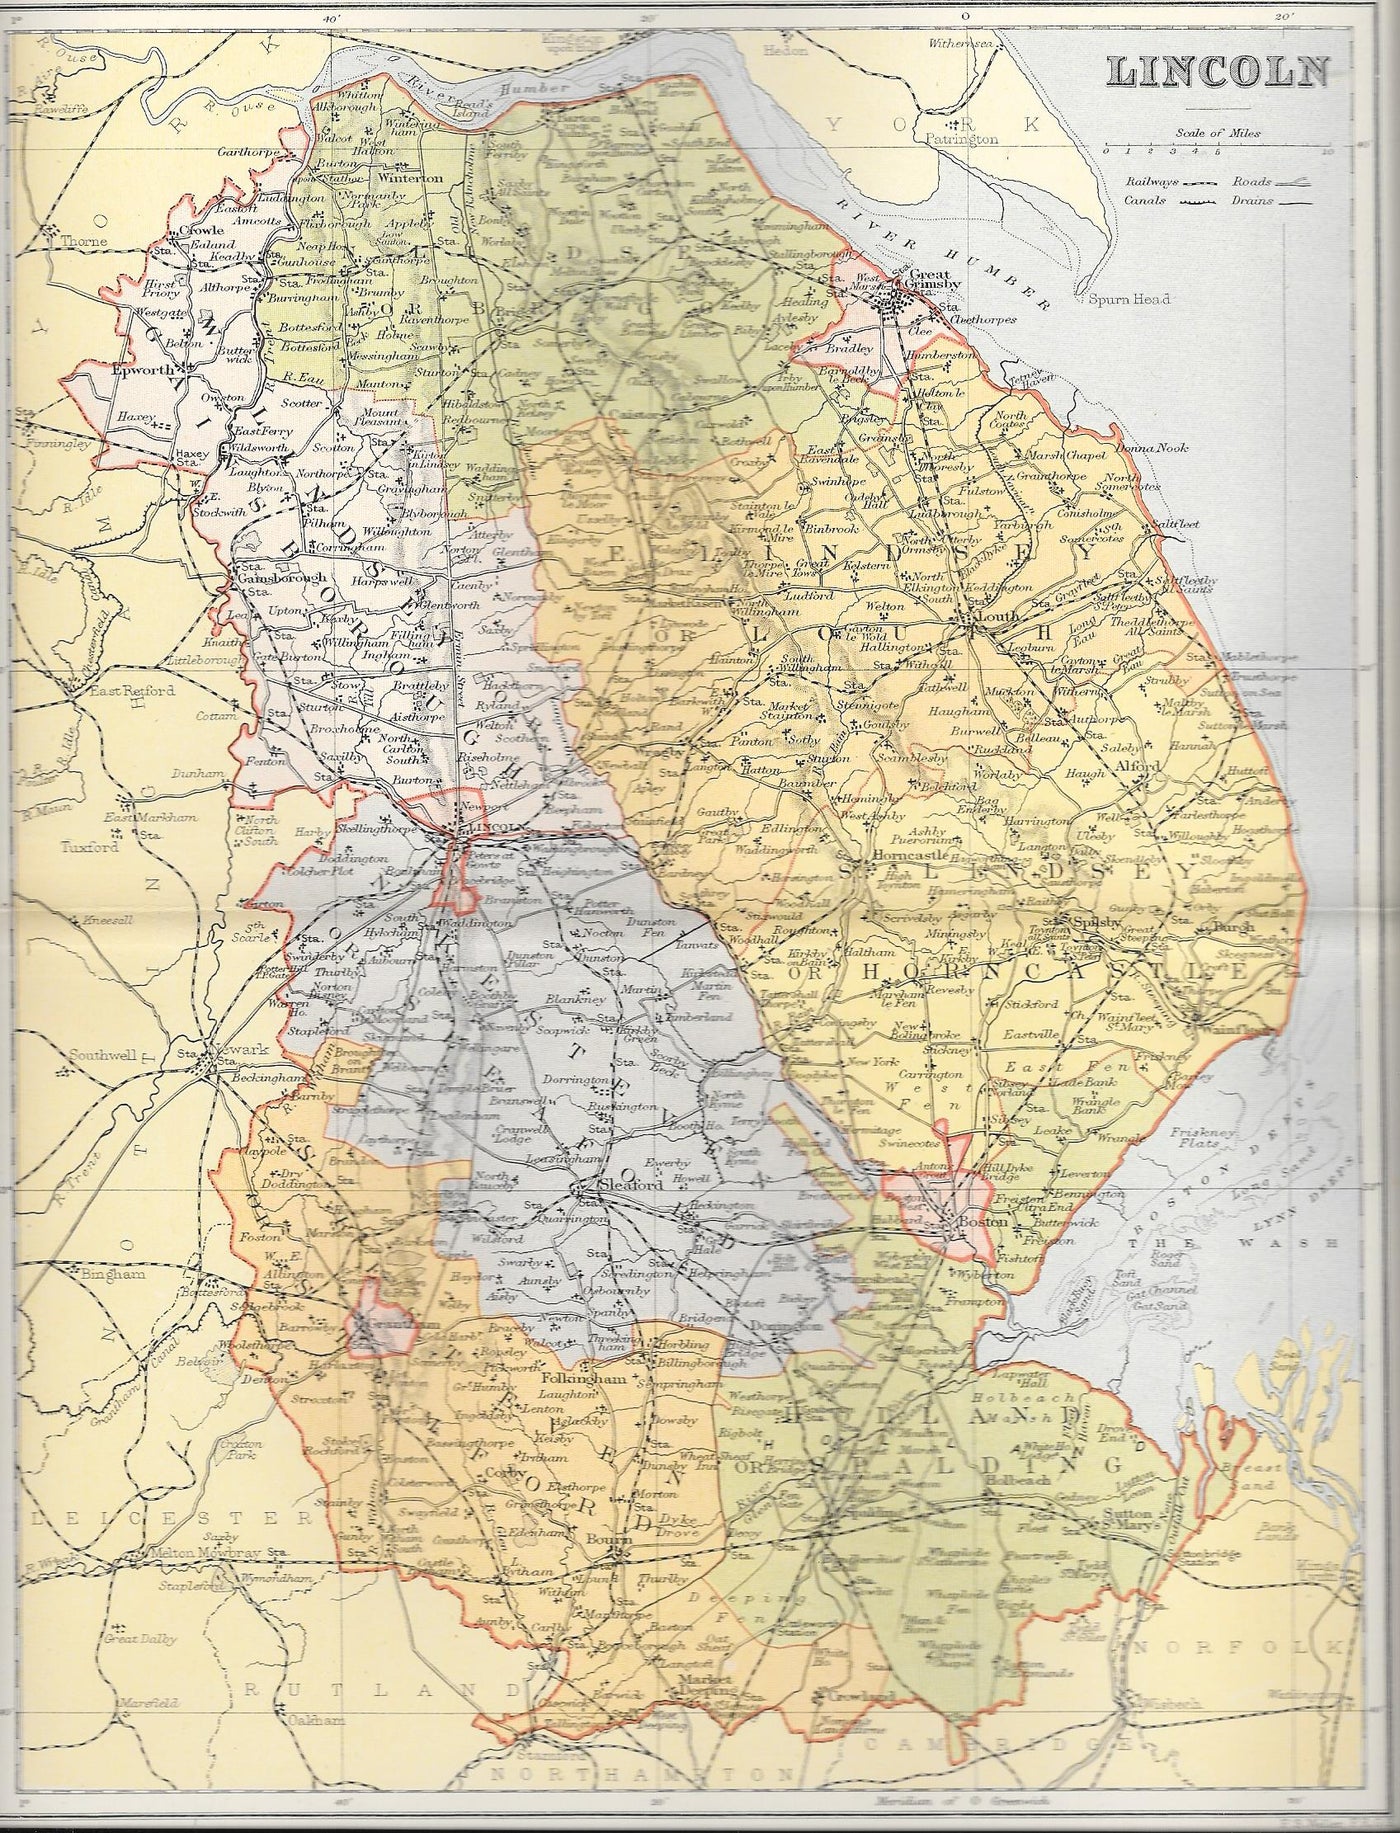 Lincolnshire (Lincoln) antique map published 1895